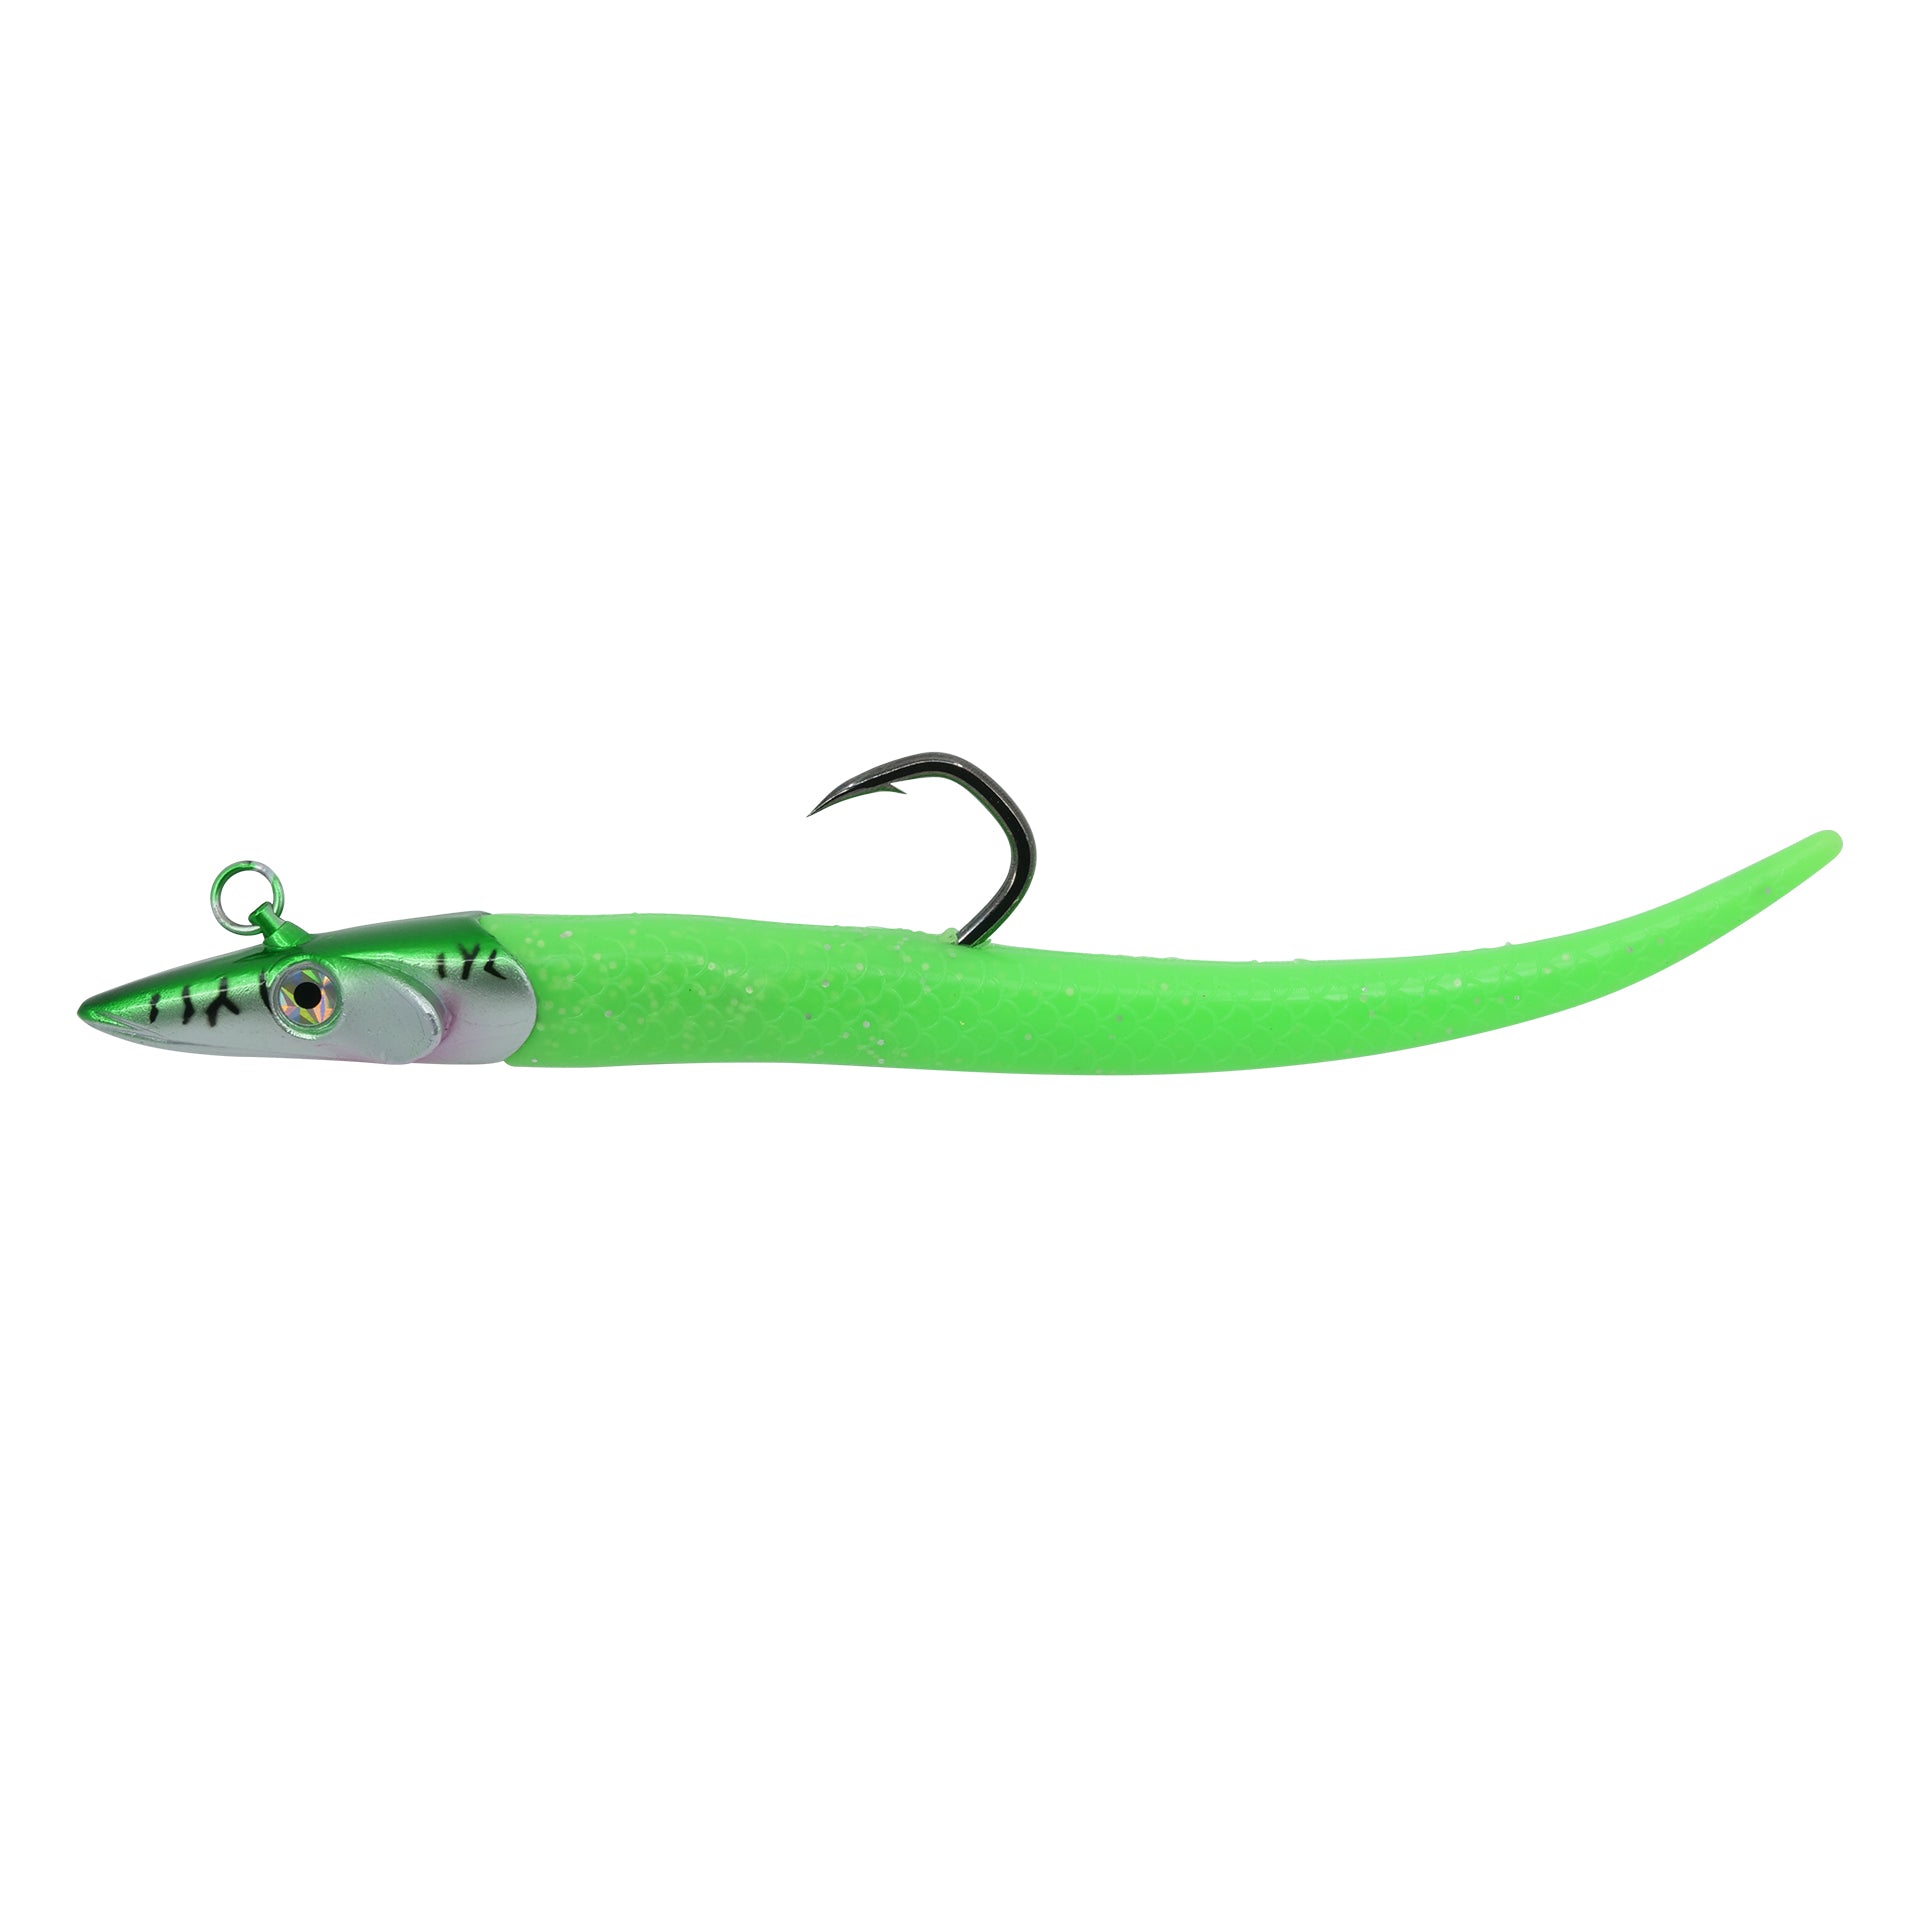 Buy Jigging Lure For Tuna online